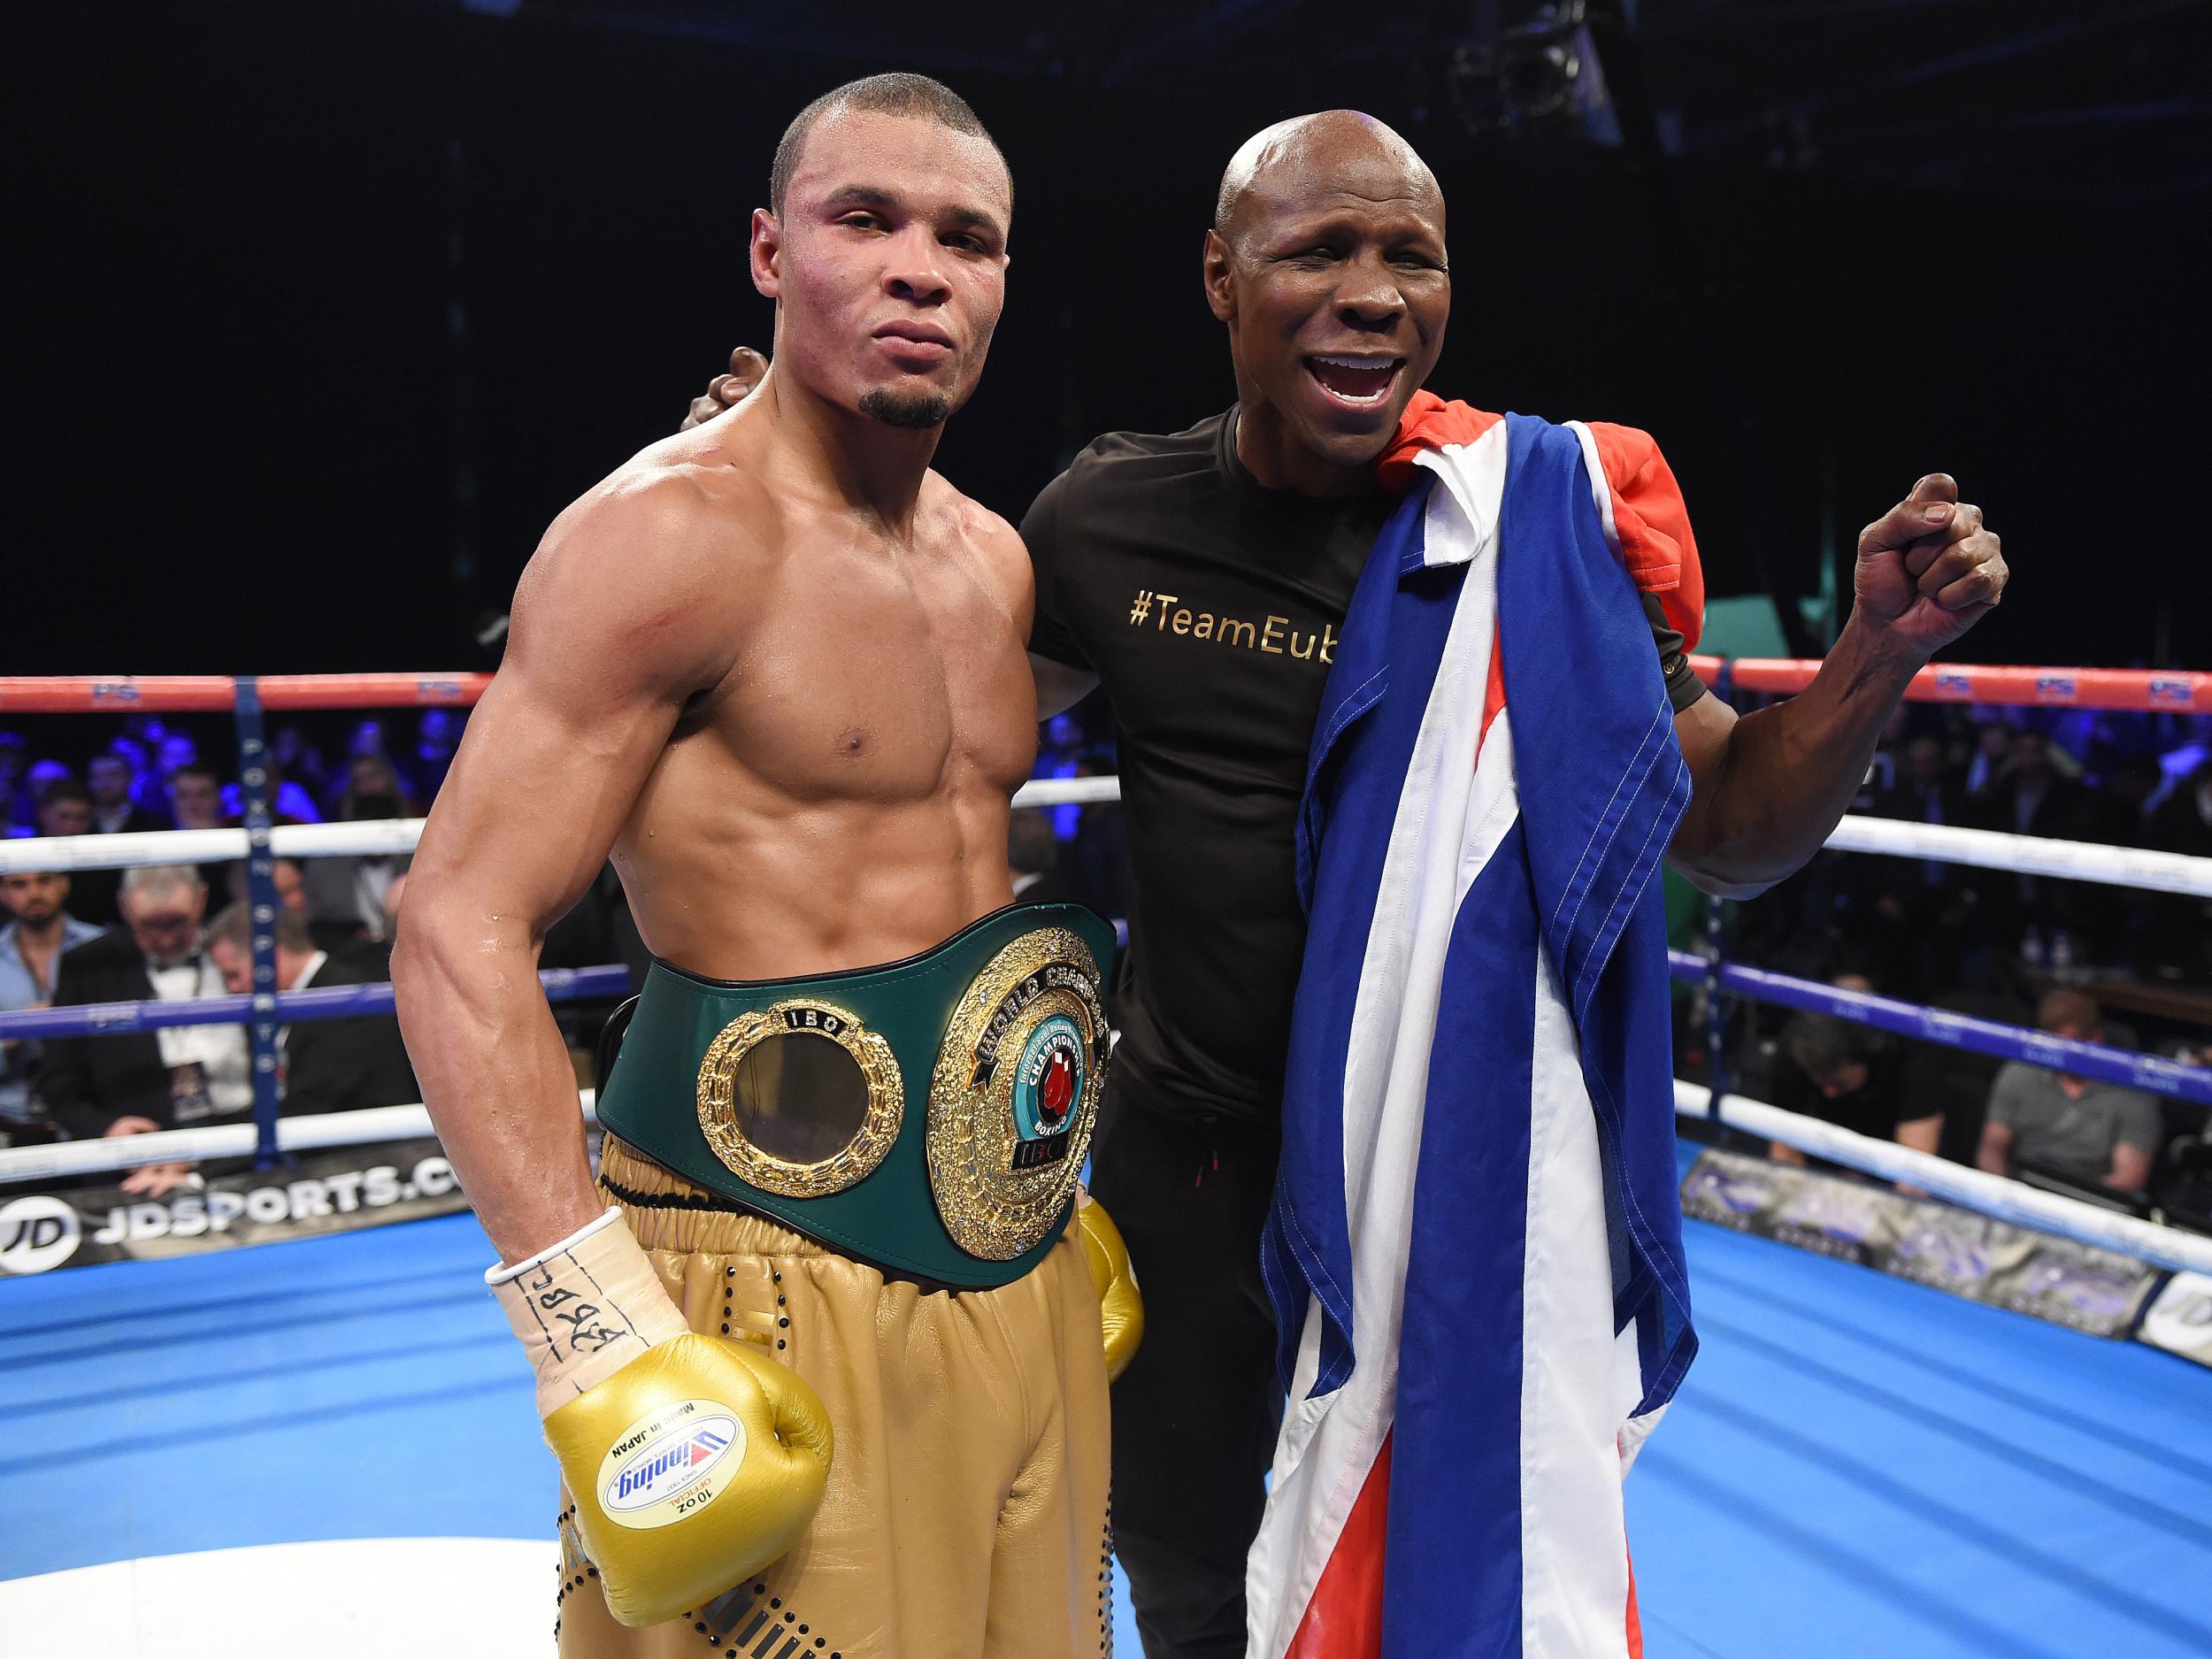 It is always a spectacle when Eubank is involved - regardless of which side of the ropes he is on